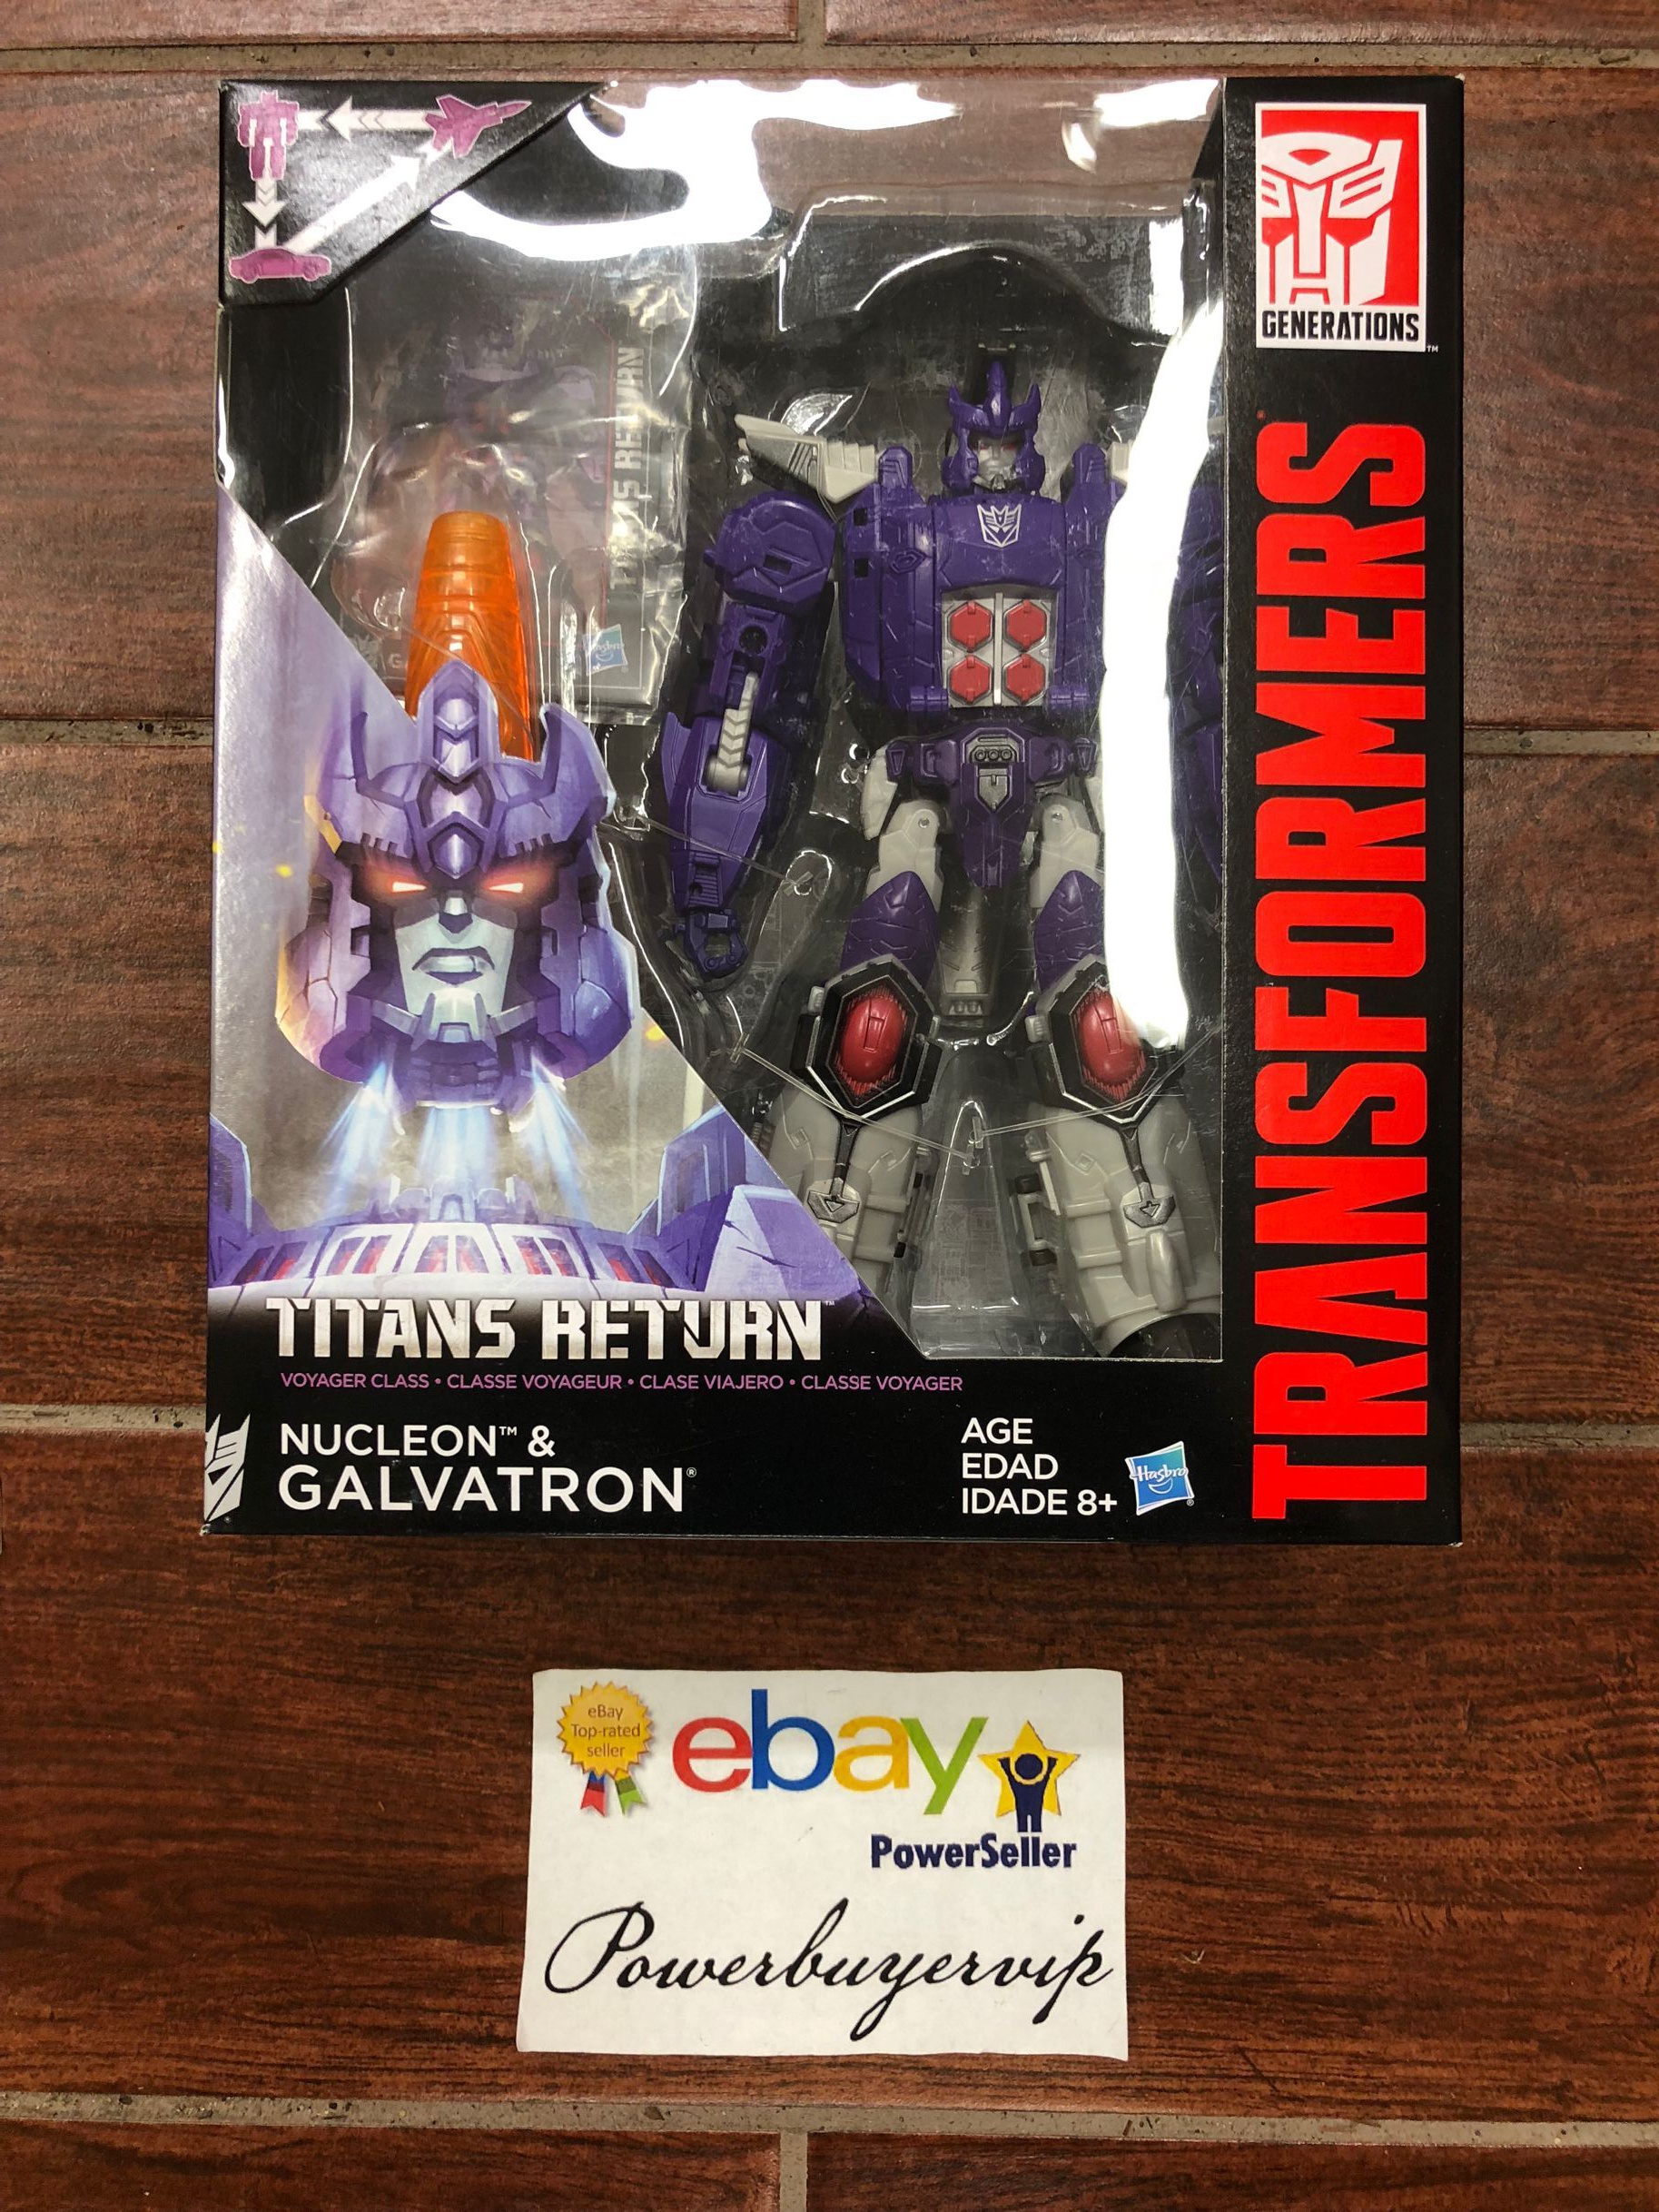 NEW Transformers Titans Return Galvatron & Nucleon Voyager Class Action Figure